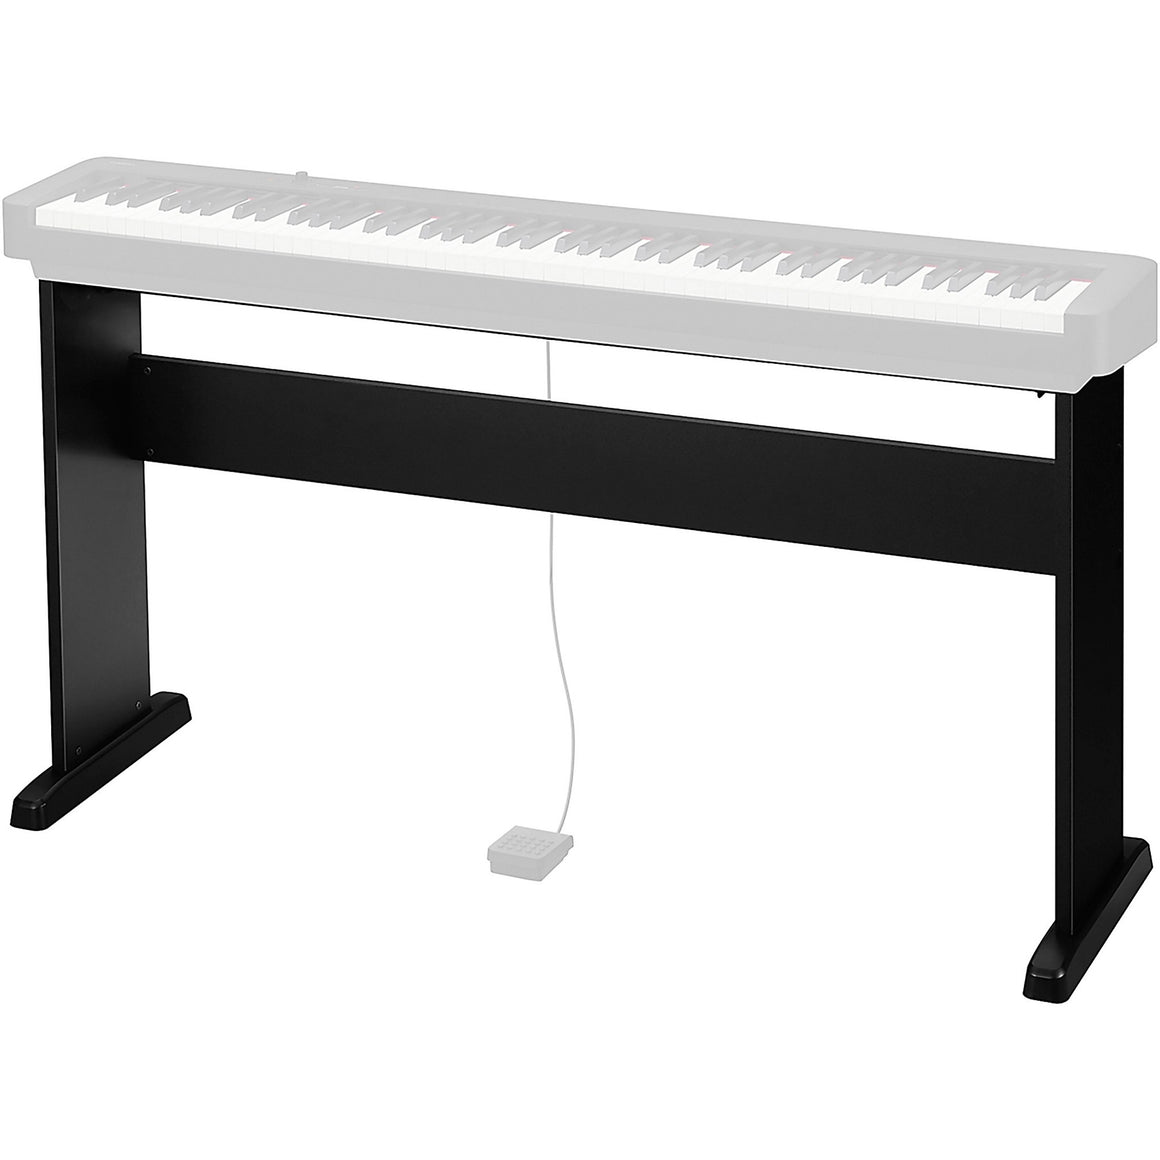 CASIO CS46 Black Stand for CDP-S160 and CDP-S360